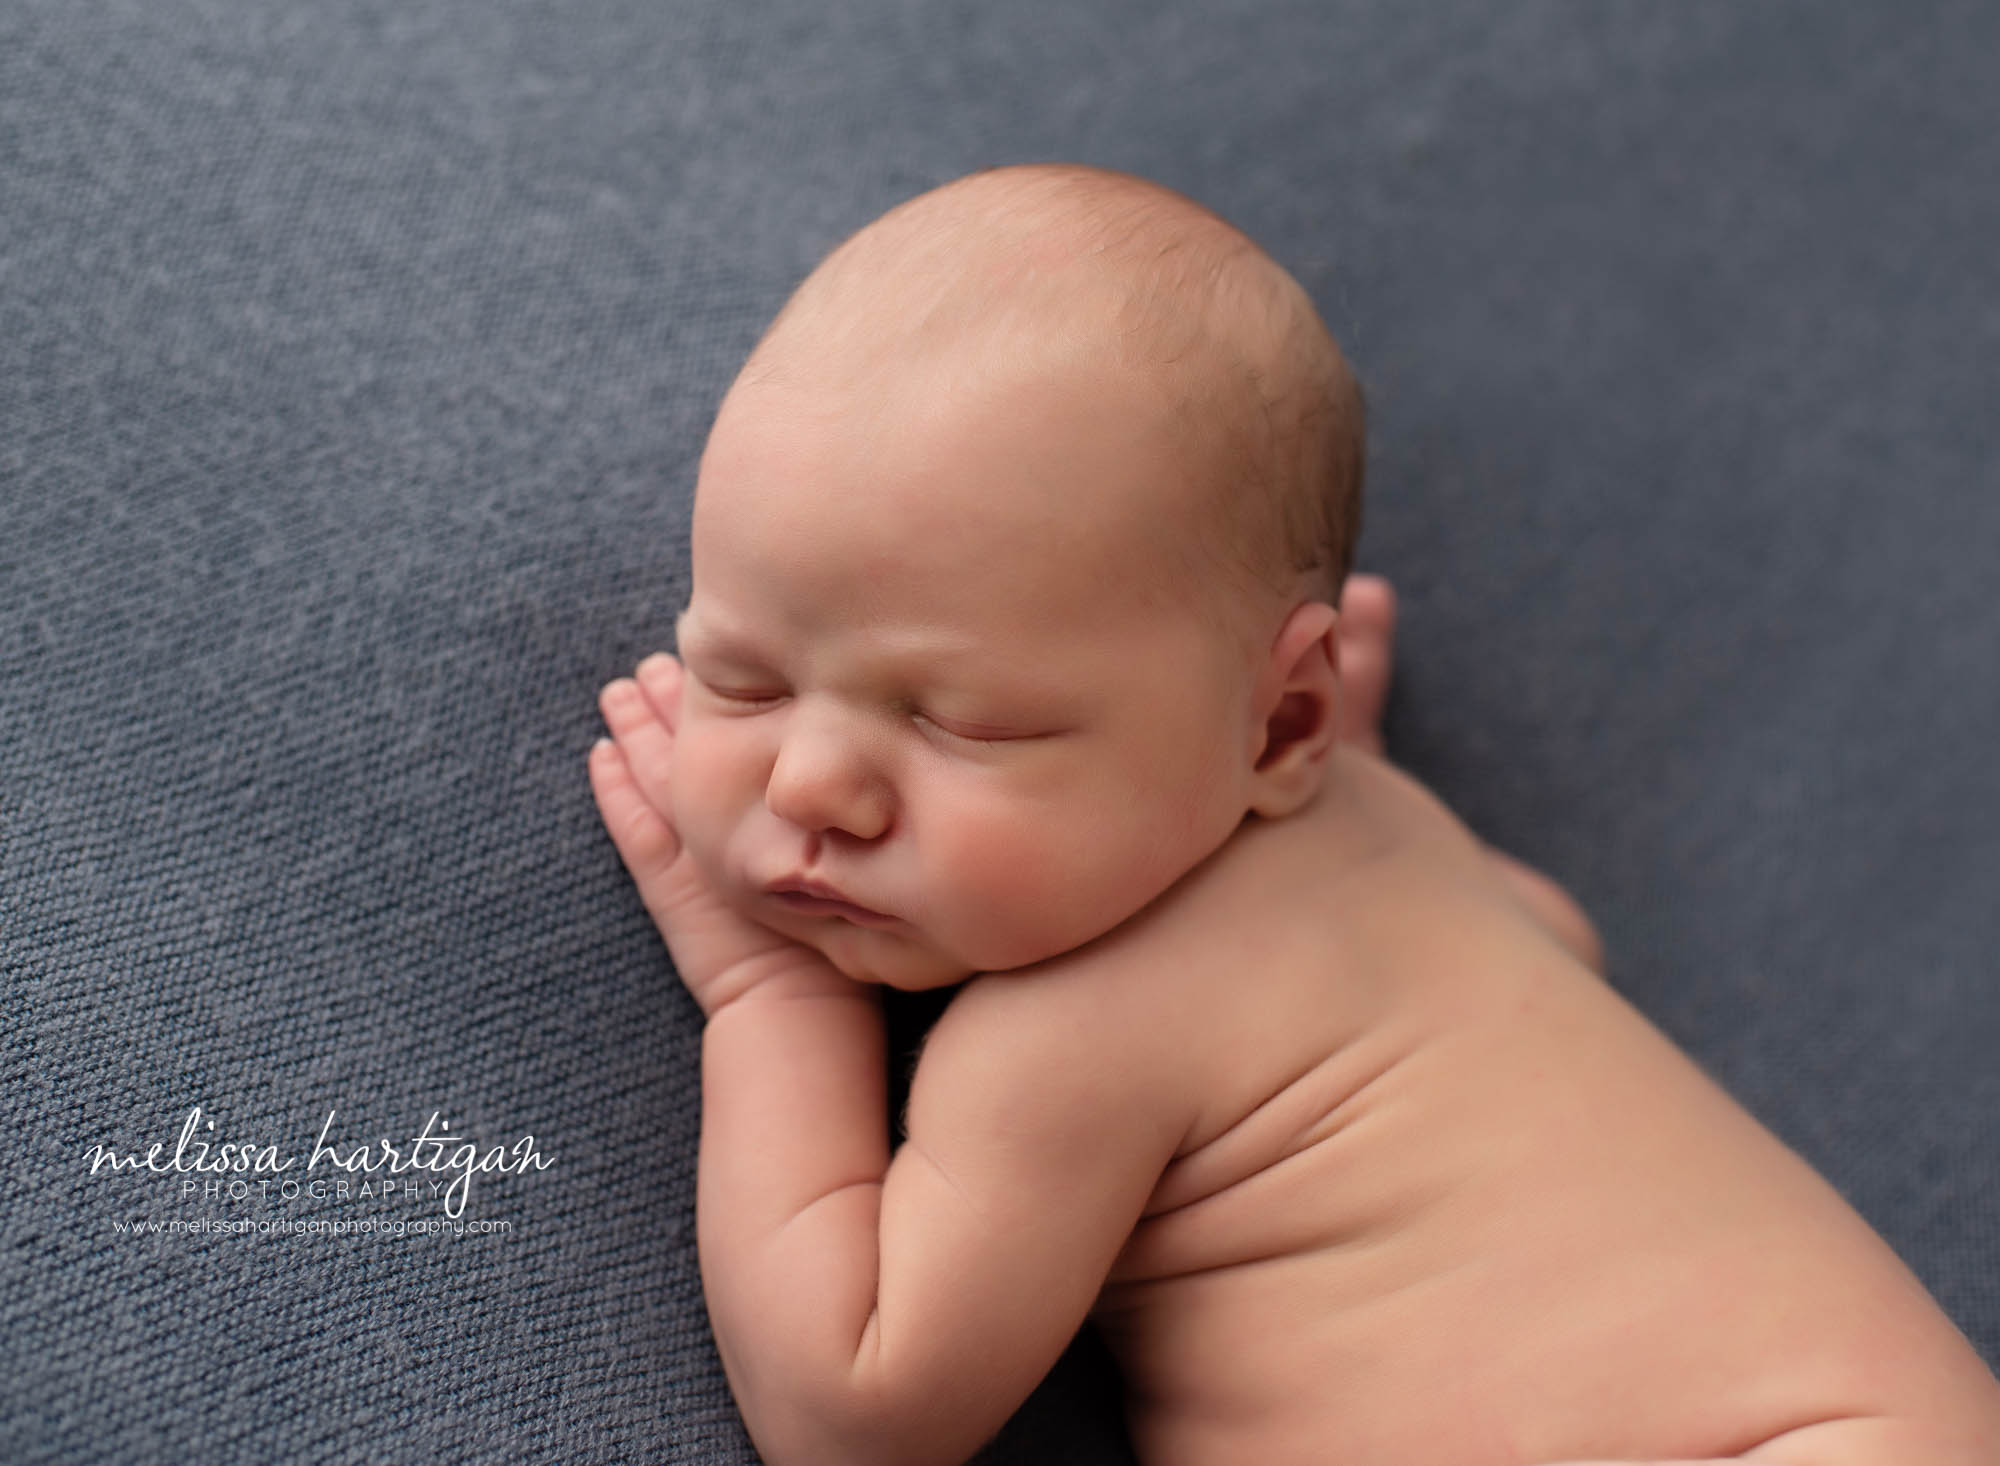 baby boy posed with hand under cheek on denim blue posing backdrop tolland Ct newborn photography